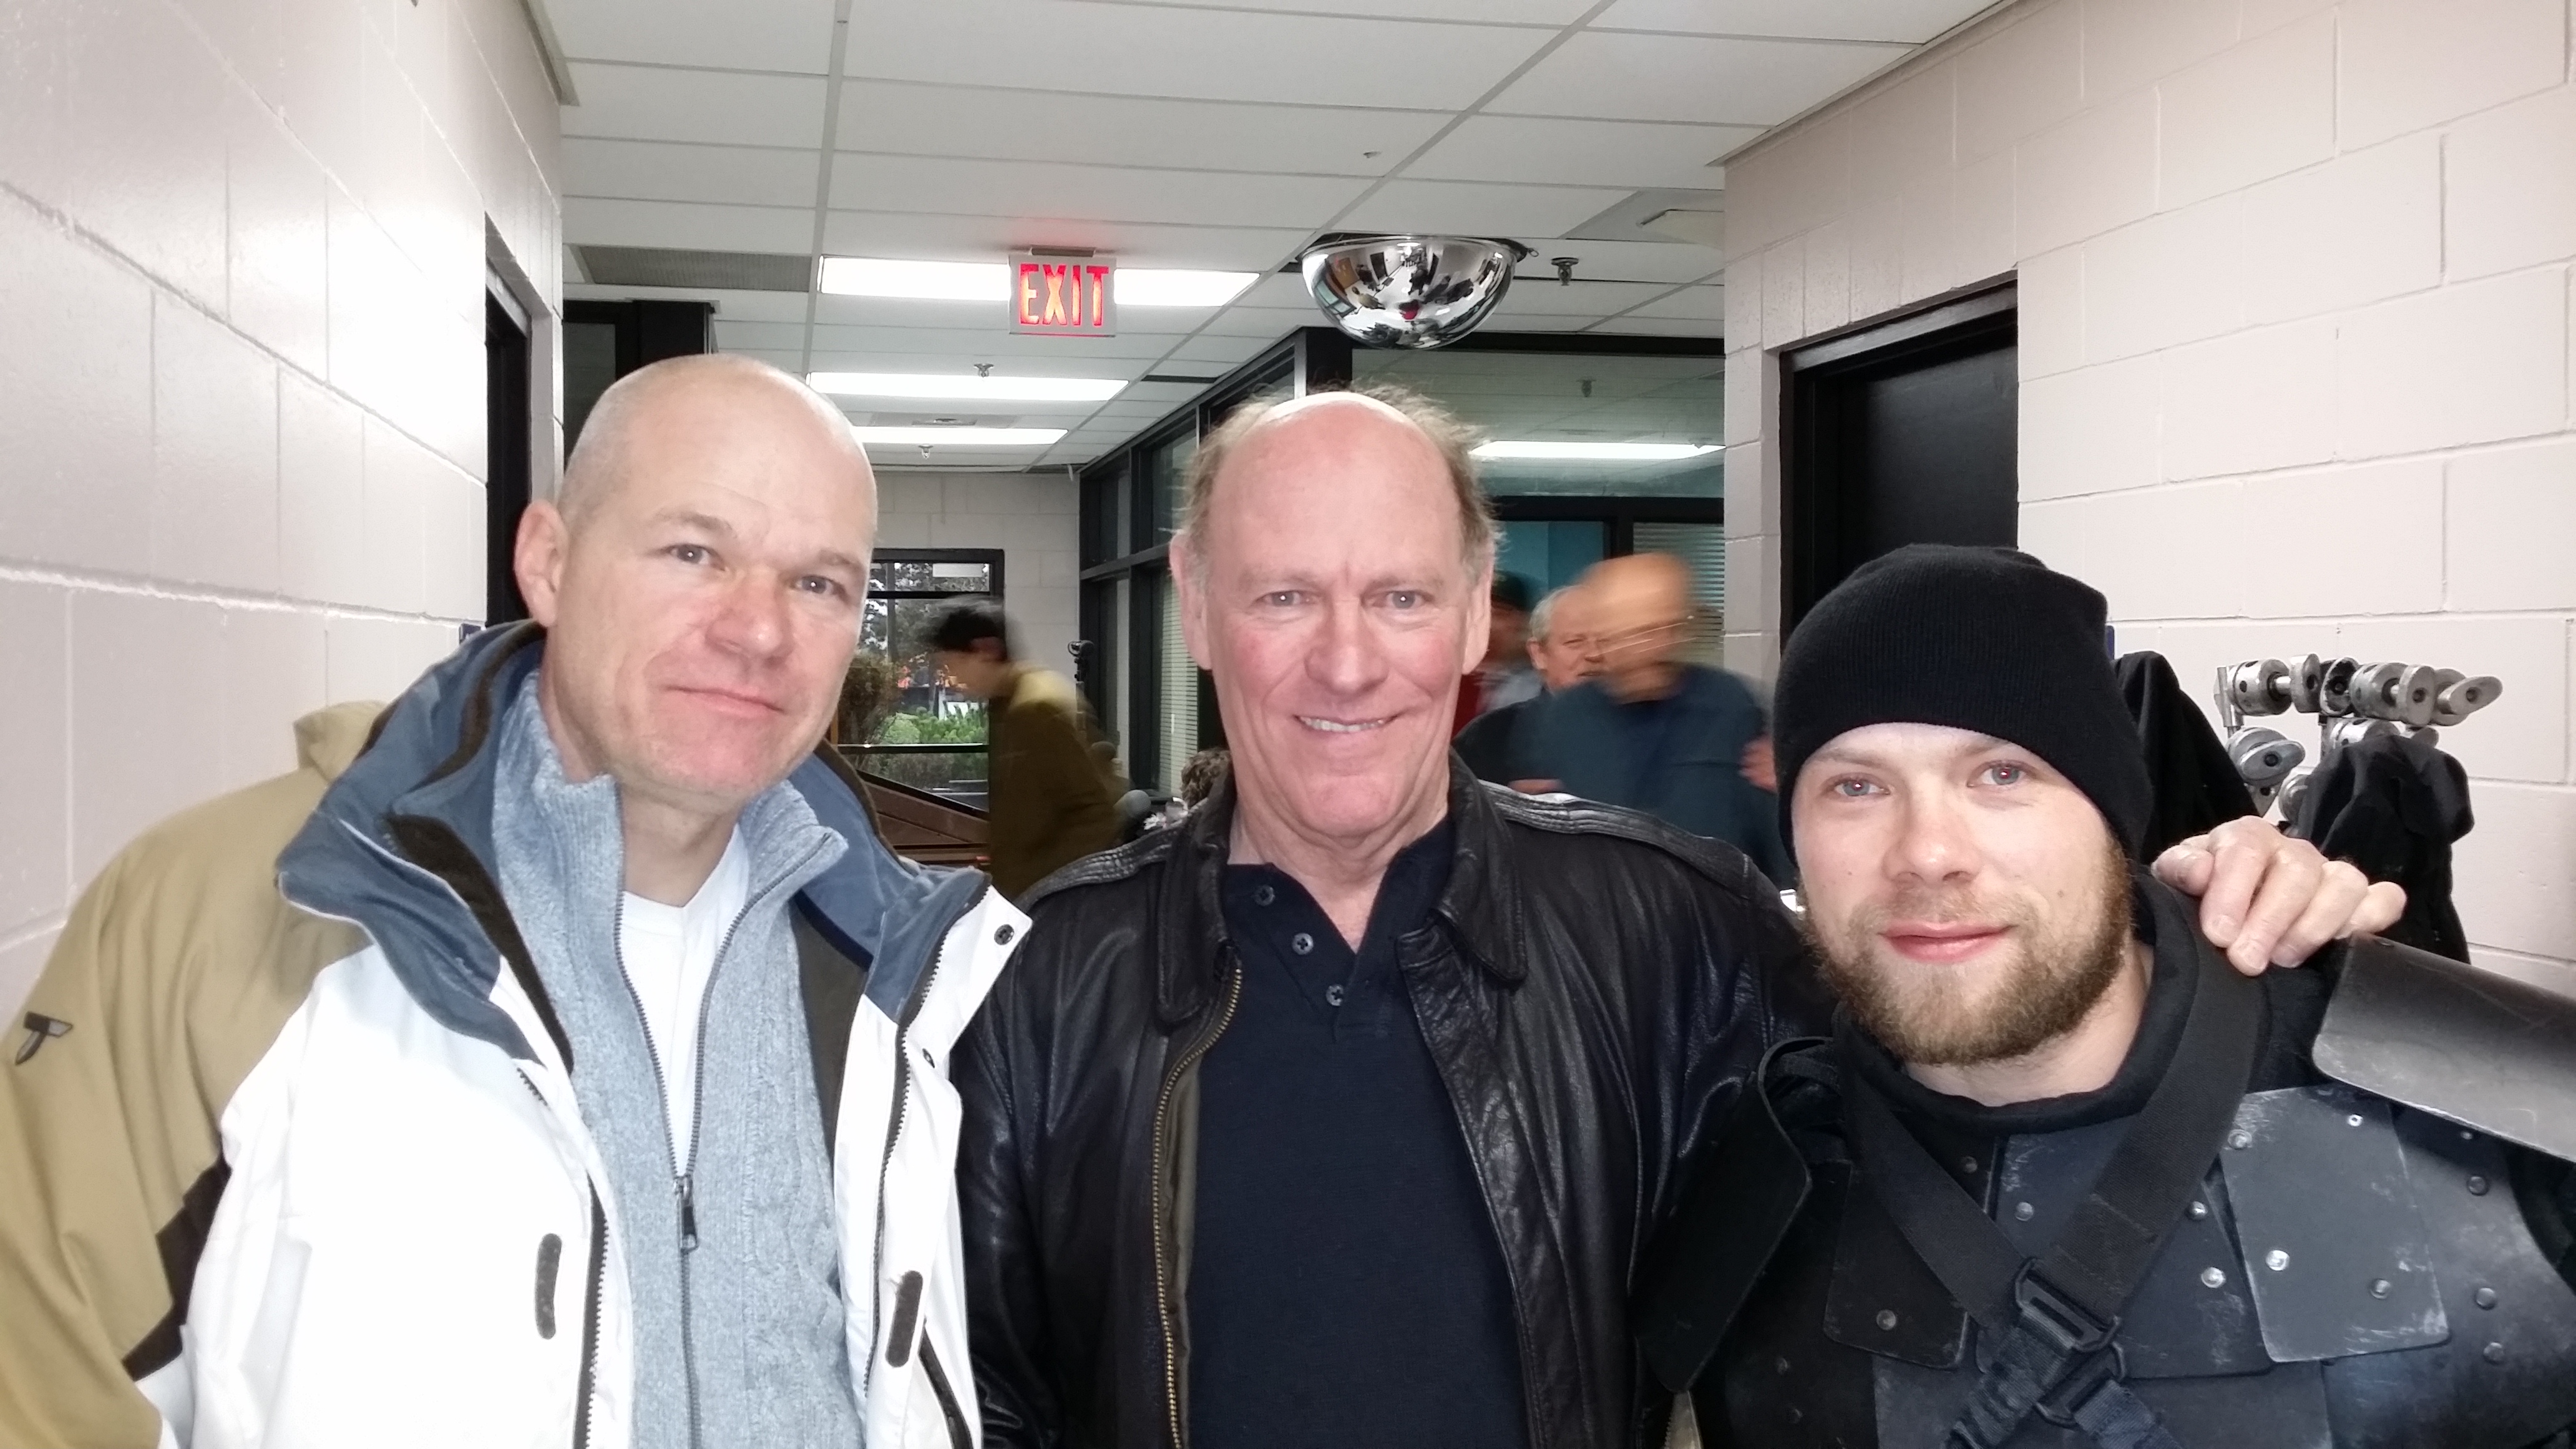 Uwe Boll director of Rampage with Randall Perry and Brendan Fletcher.